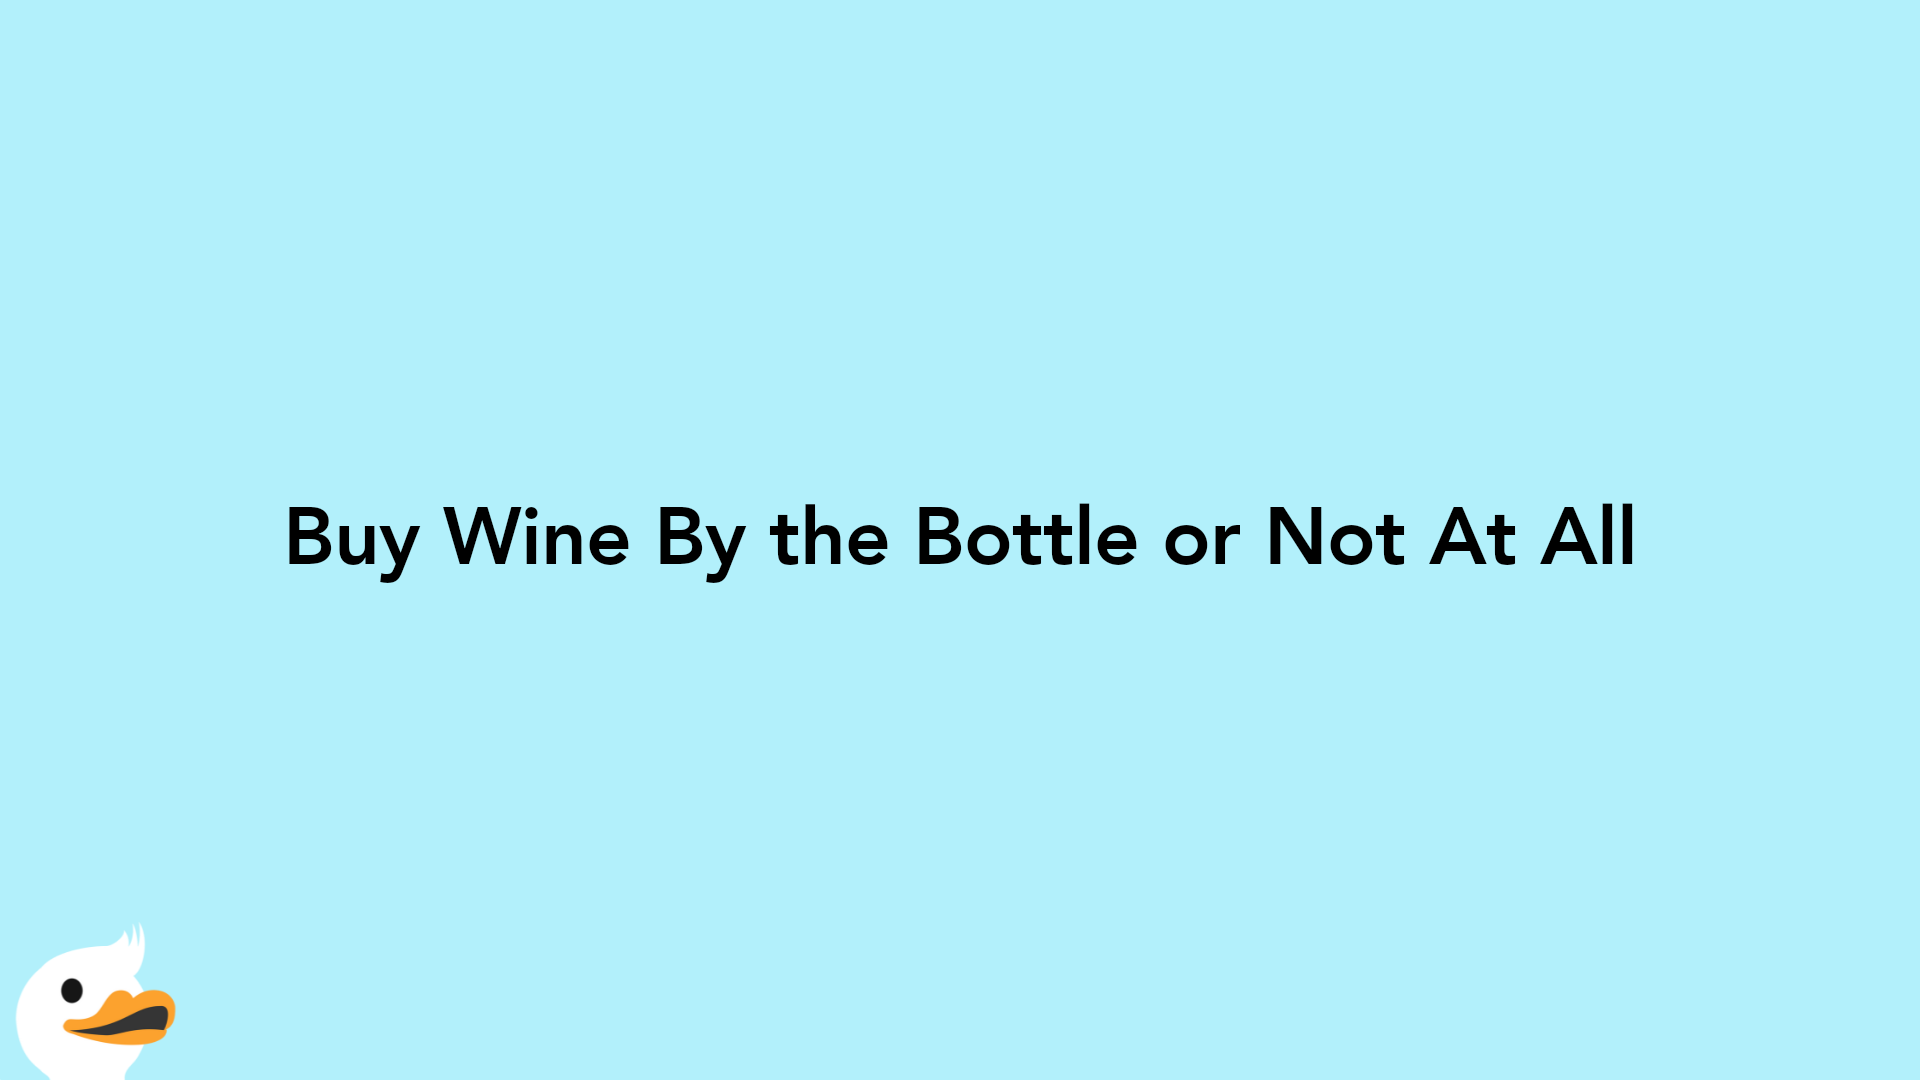 Buy Wine By the Bottle or Not At All